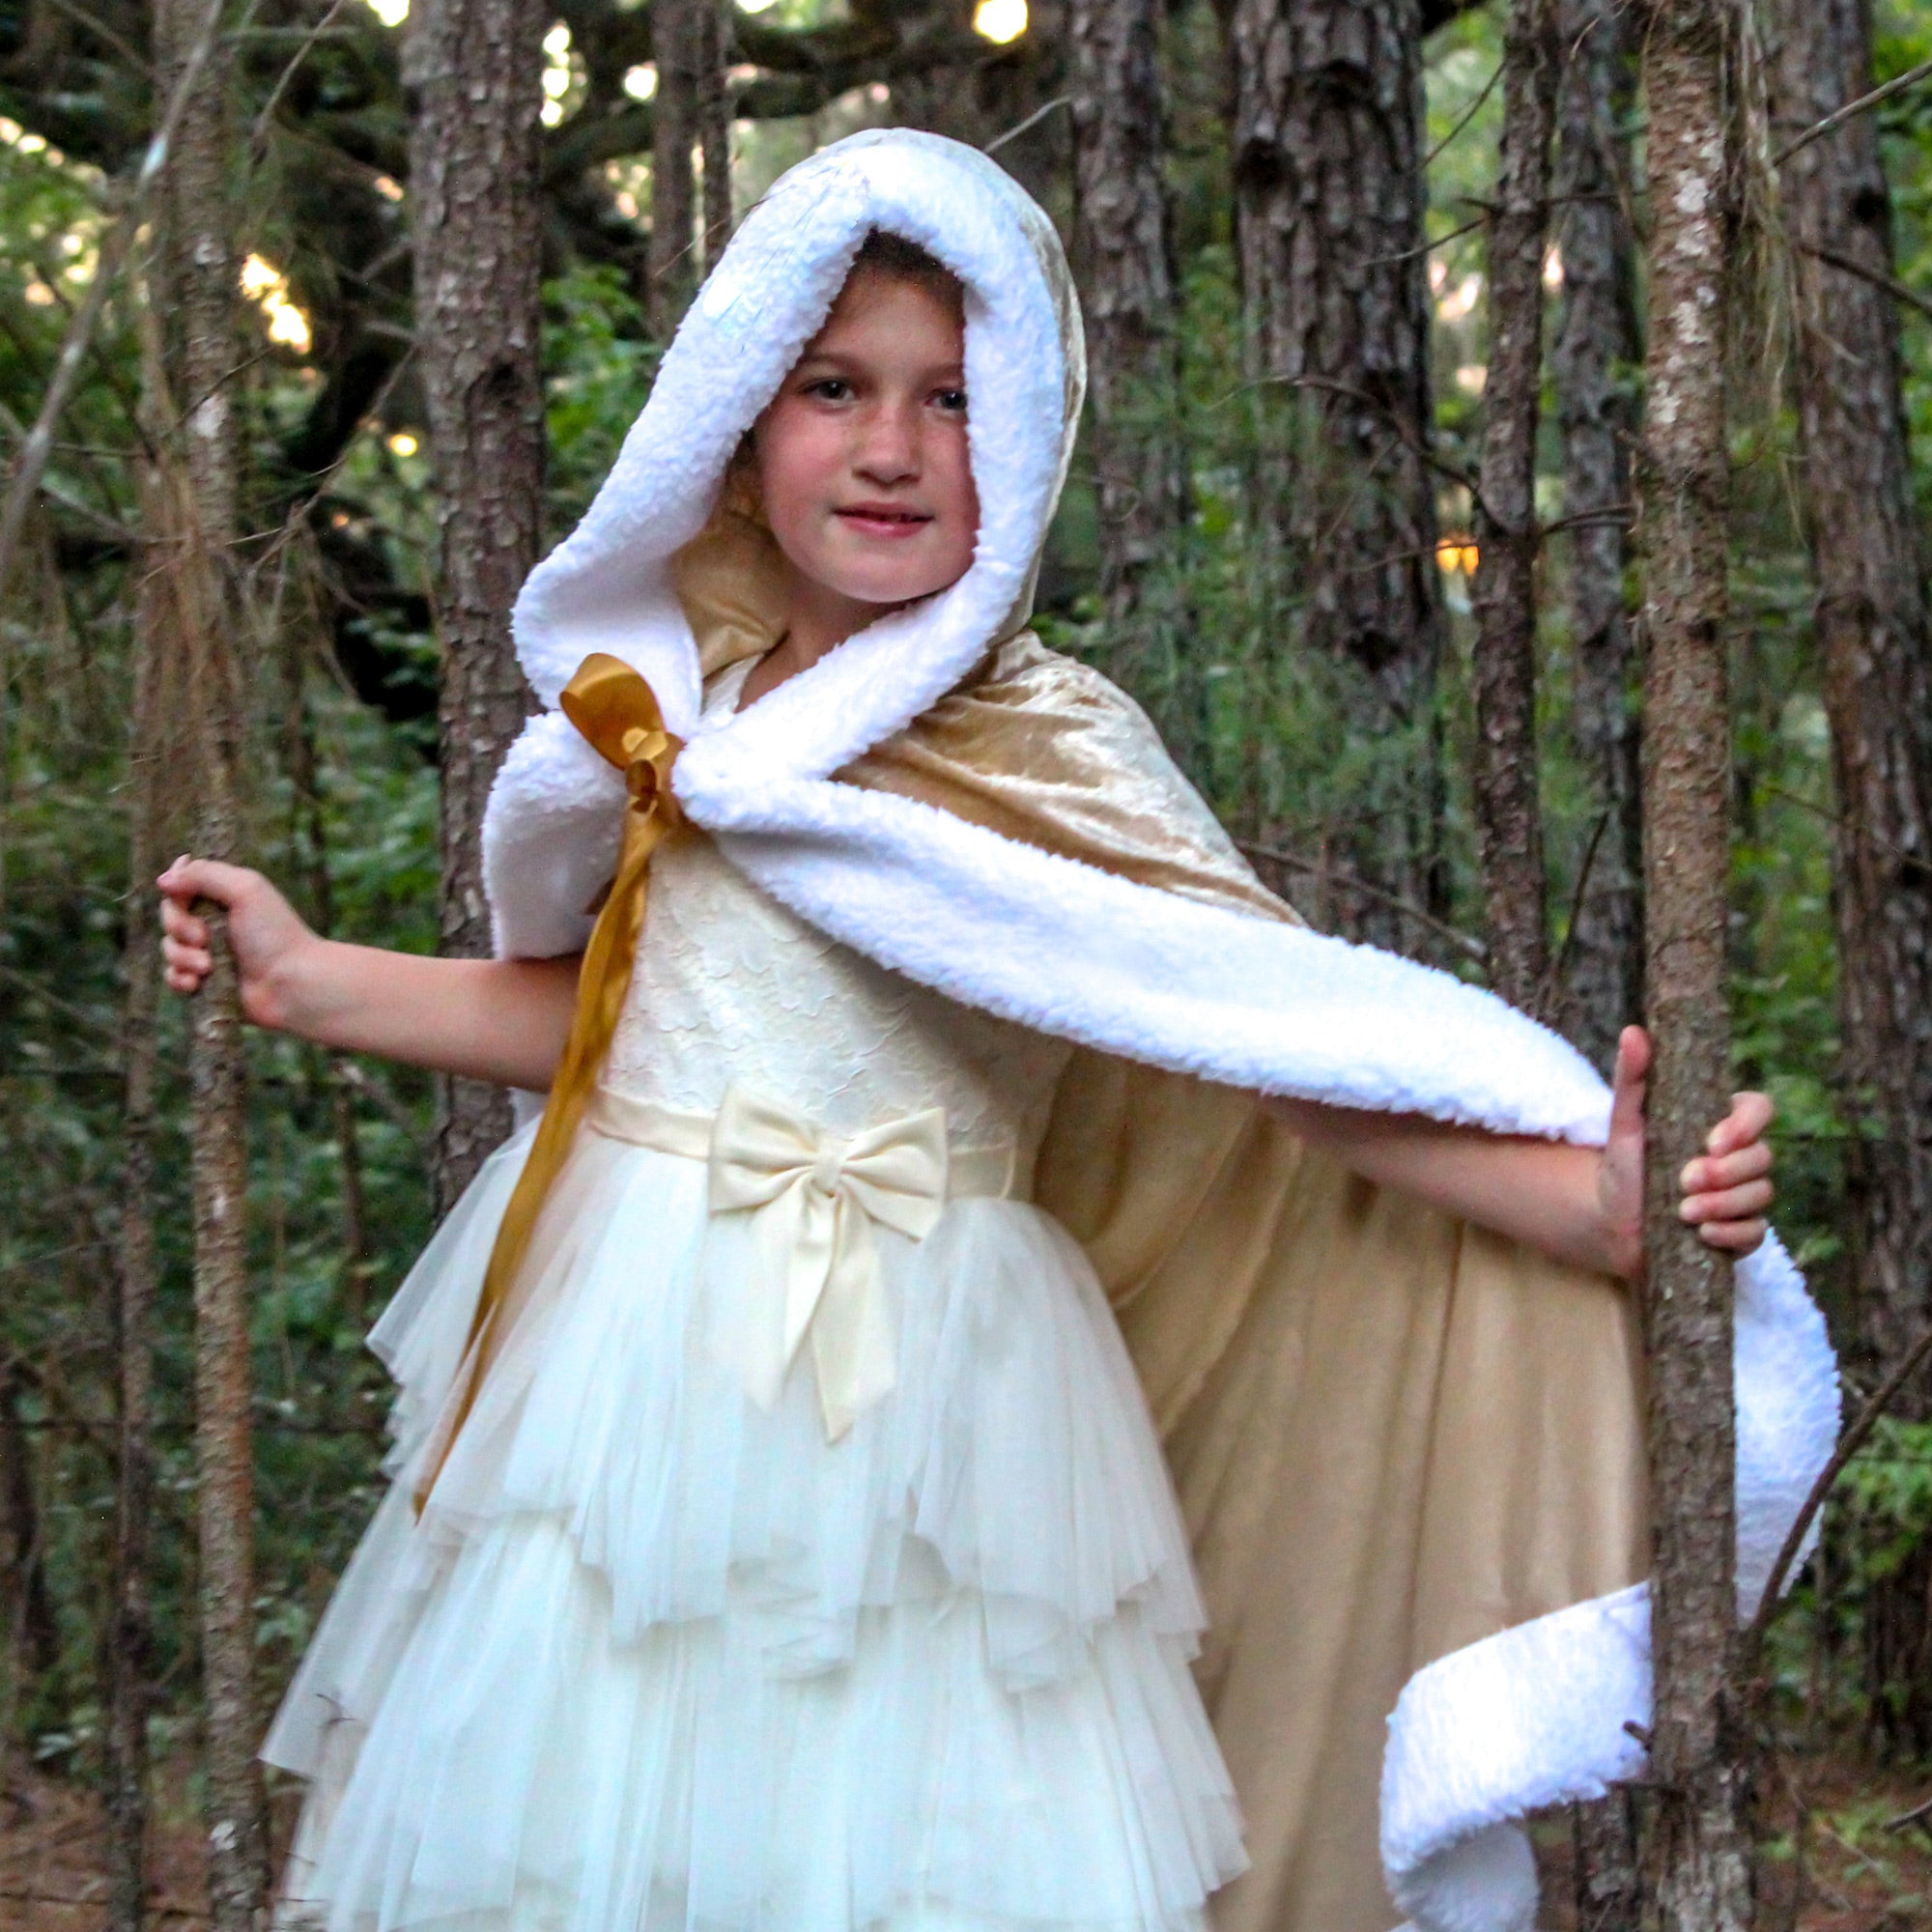 Everfan Medieval Cloak with Fur Mantle Small (Kids - 30 Long) / Optional Double-Sided / Inside Cloak Layer